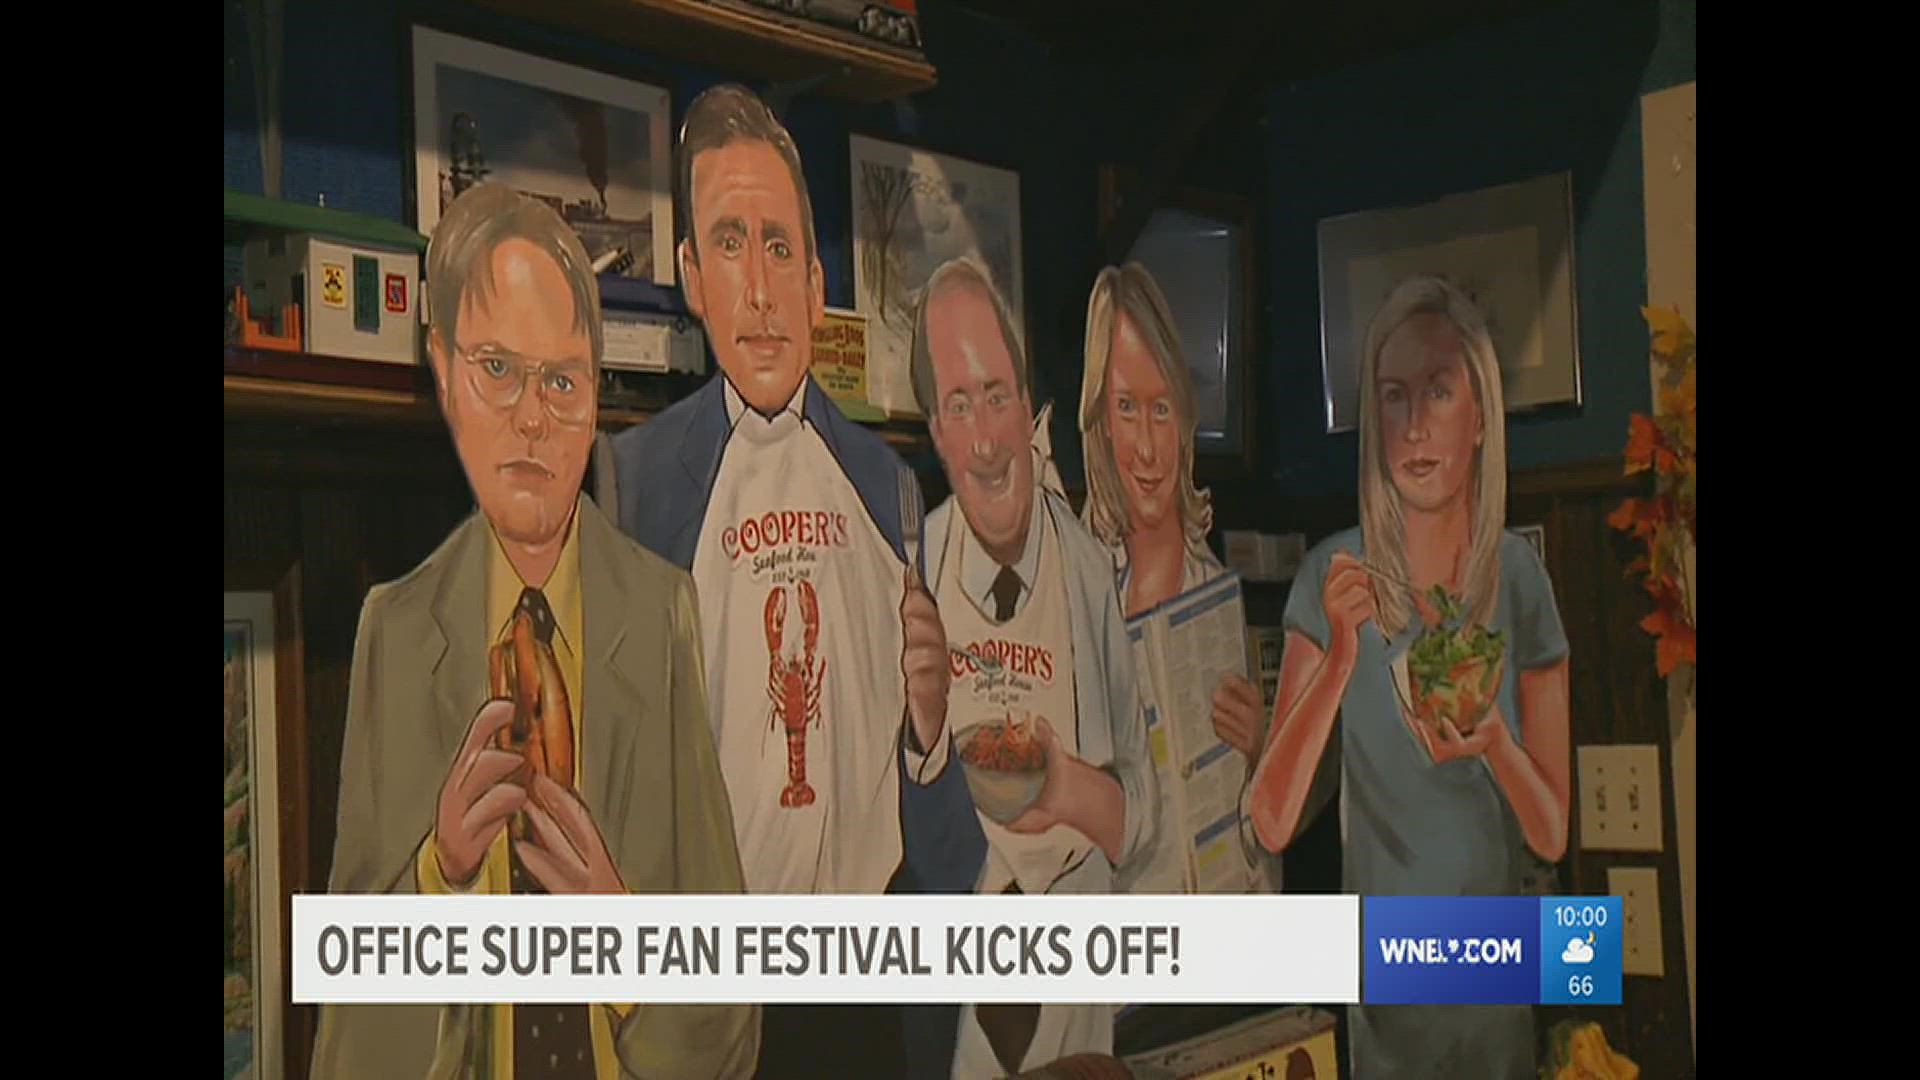 The private dinner was part of a bigger event called the “Office Super Fan Festival” that's drawn hundreds of fans to Lackawanna County.